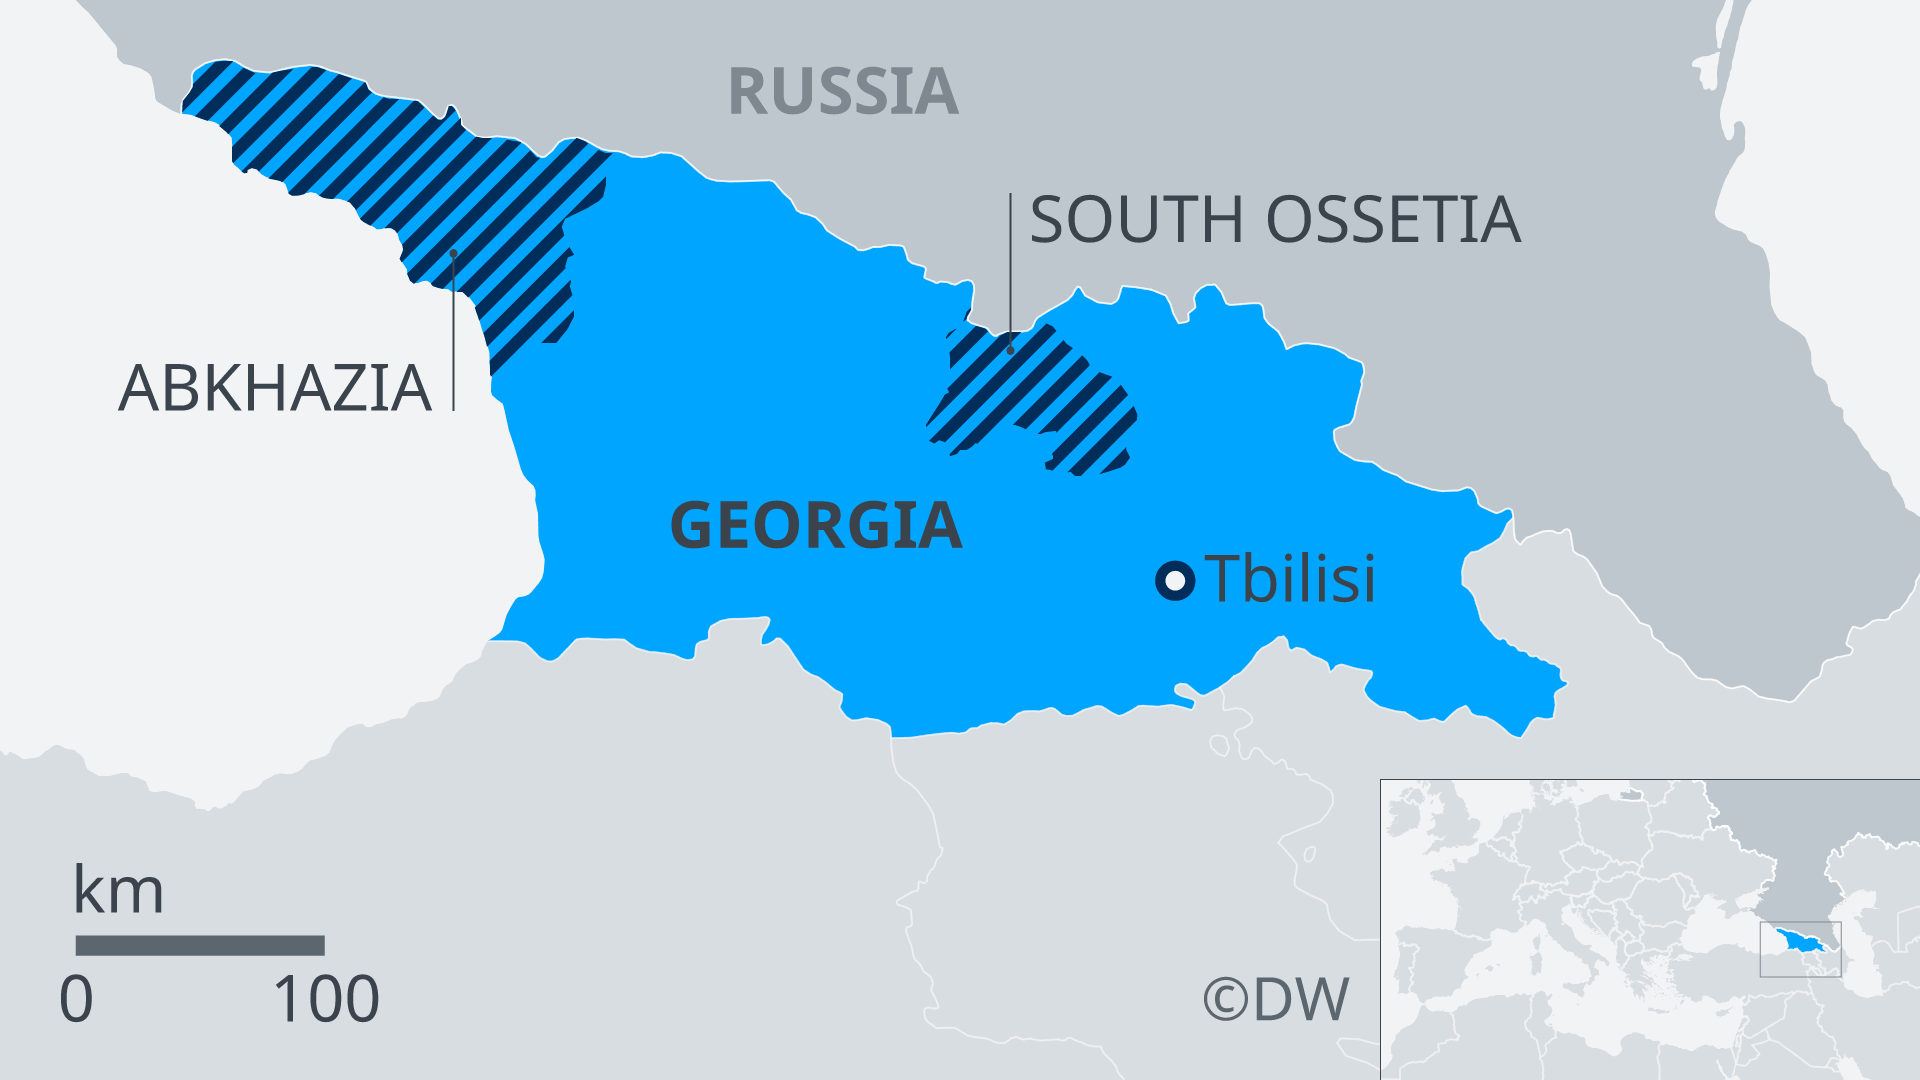 Map showing Georgia and self-proclaimed republics of South Ossetia and Abkhazia